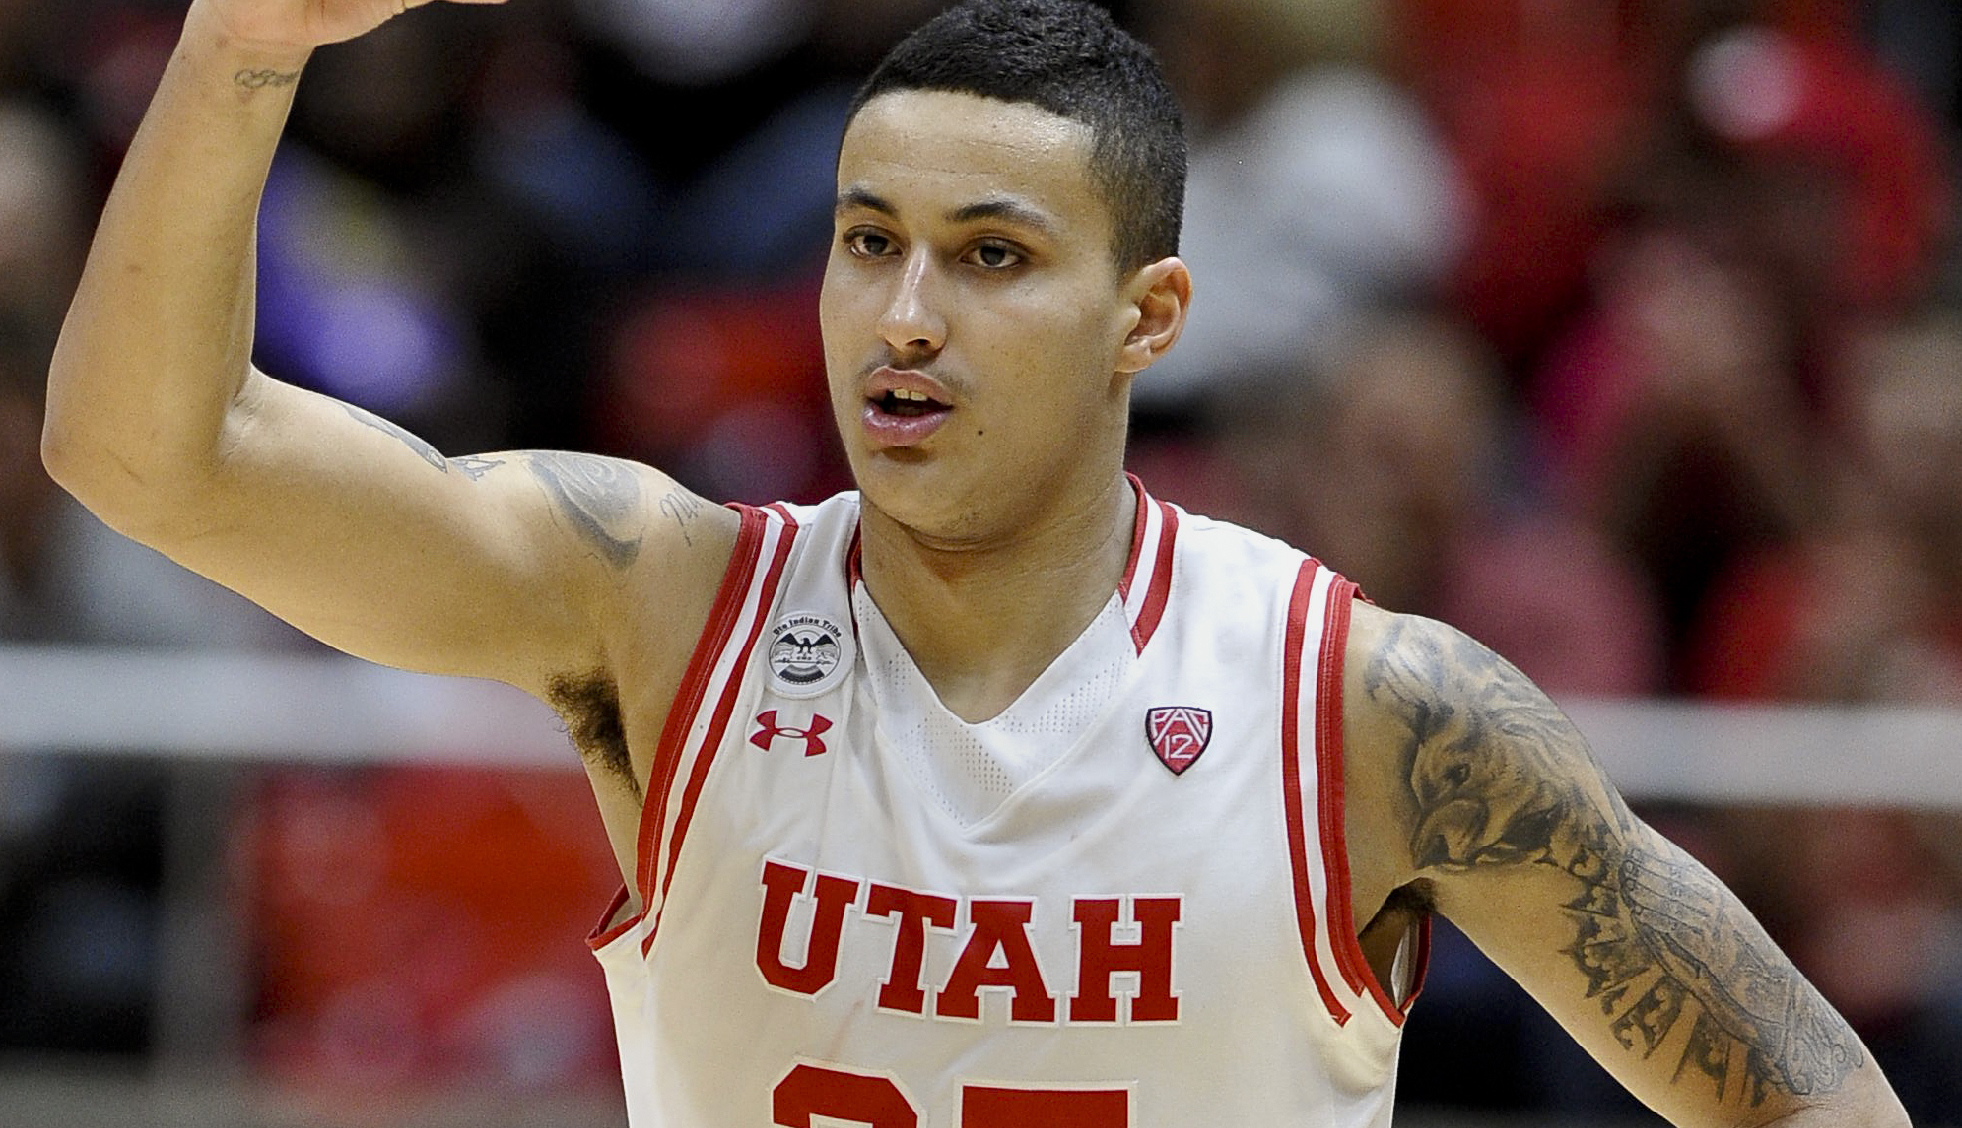 SALT LAKE CITY, UT - FEBRUARY 10: Kyle Kuzma #35 of the Utah Utes gestures after a three-point play in the second half of Utah's 90-82 win over the Washington Huskies at the Jon M. Huntsman Center on February 10, 2016 in Salt Lake City, Utah. (Photo by Gene Sweeney Jr/Getty Images)